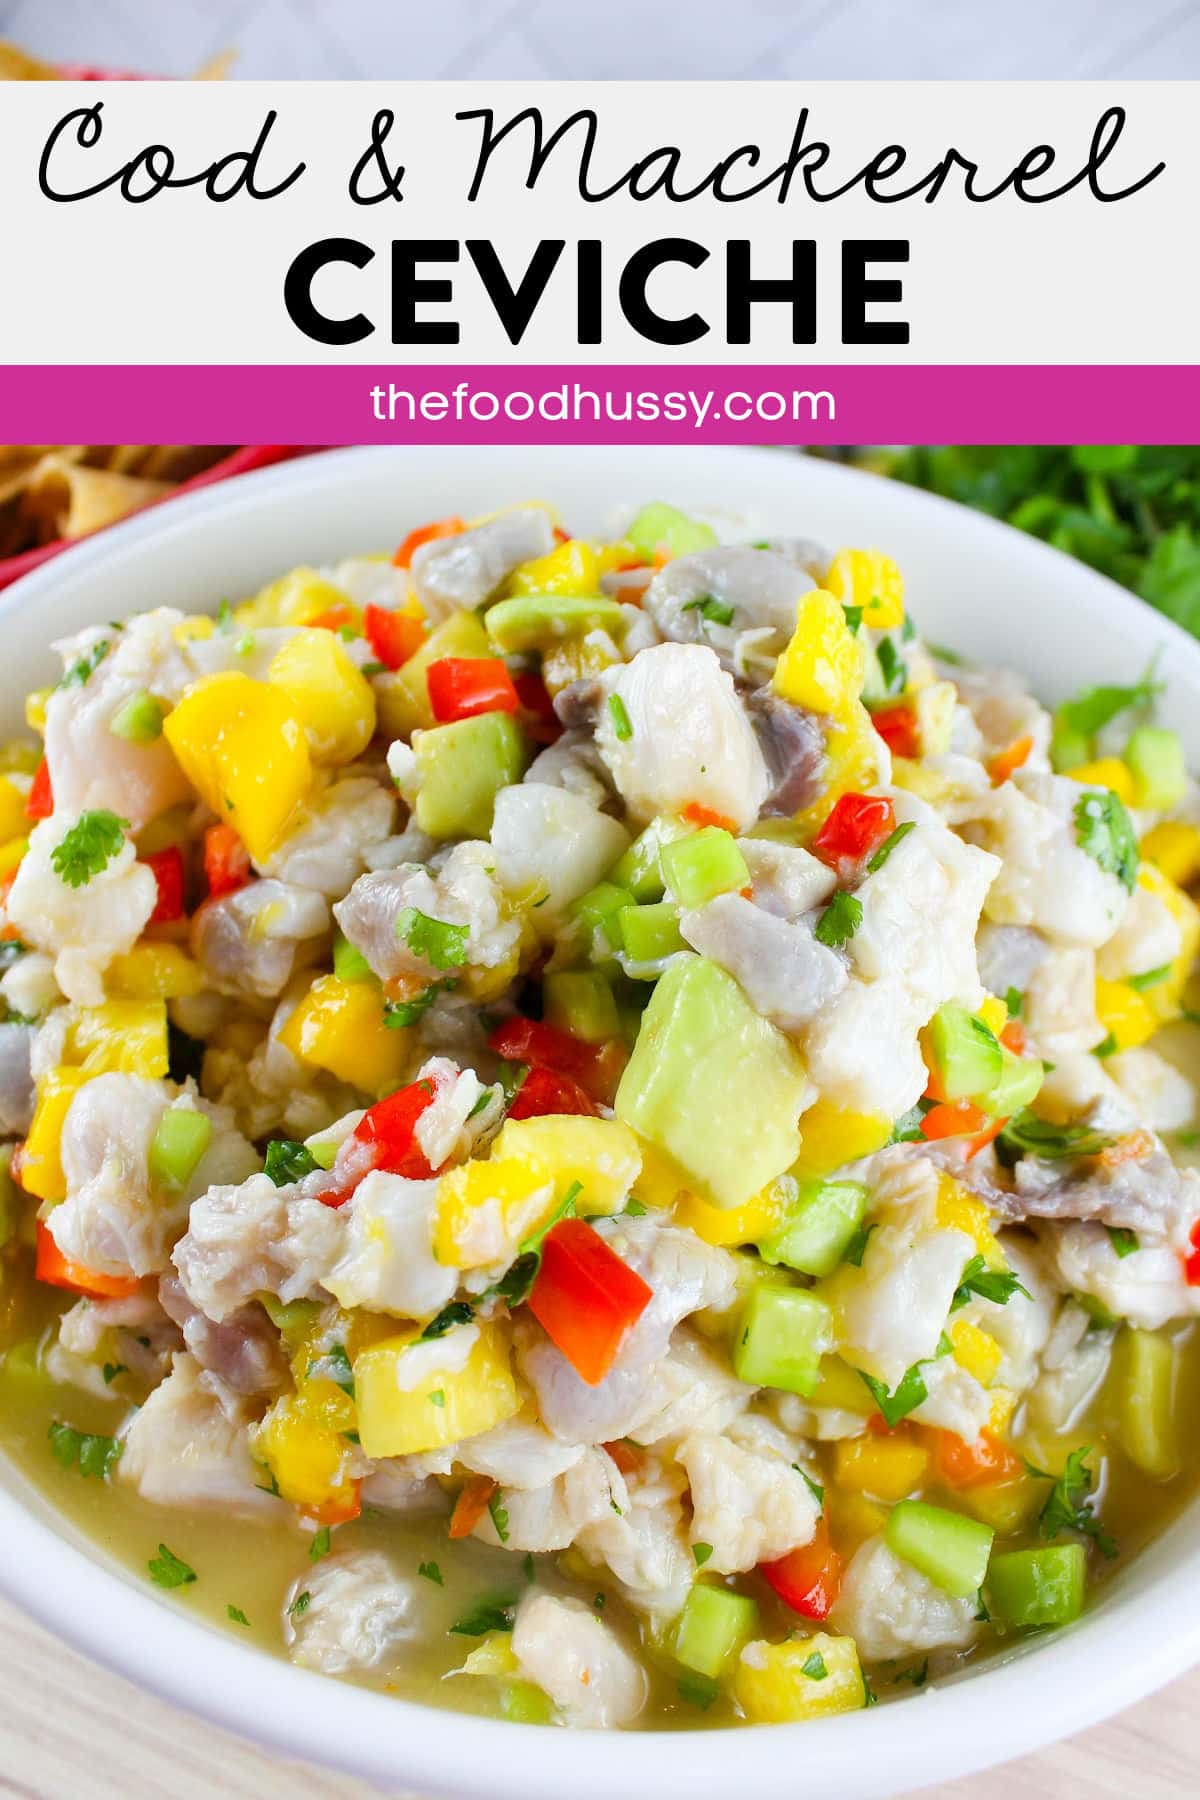 This Cod Ceviche recipe is great as an appetizer or a very healthy main course! There's fresh cod (& mackarel) as well as crunch, creamy, spicy & sweet additions to make it a delicious dish!  via @foodhussy